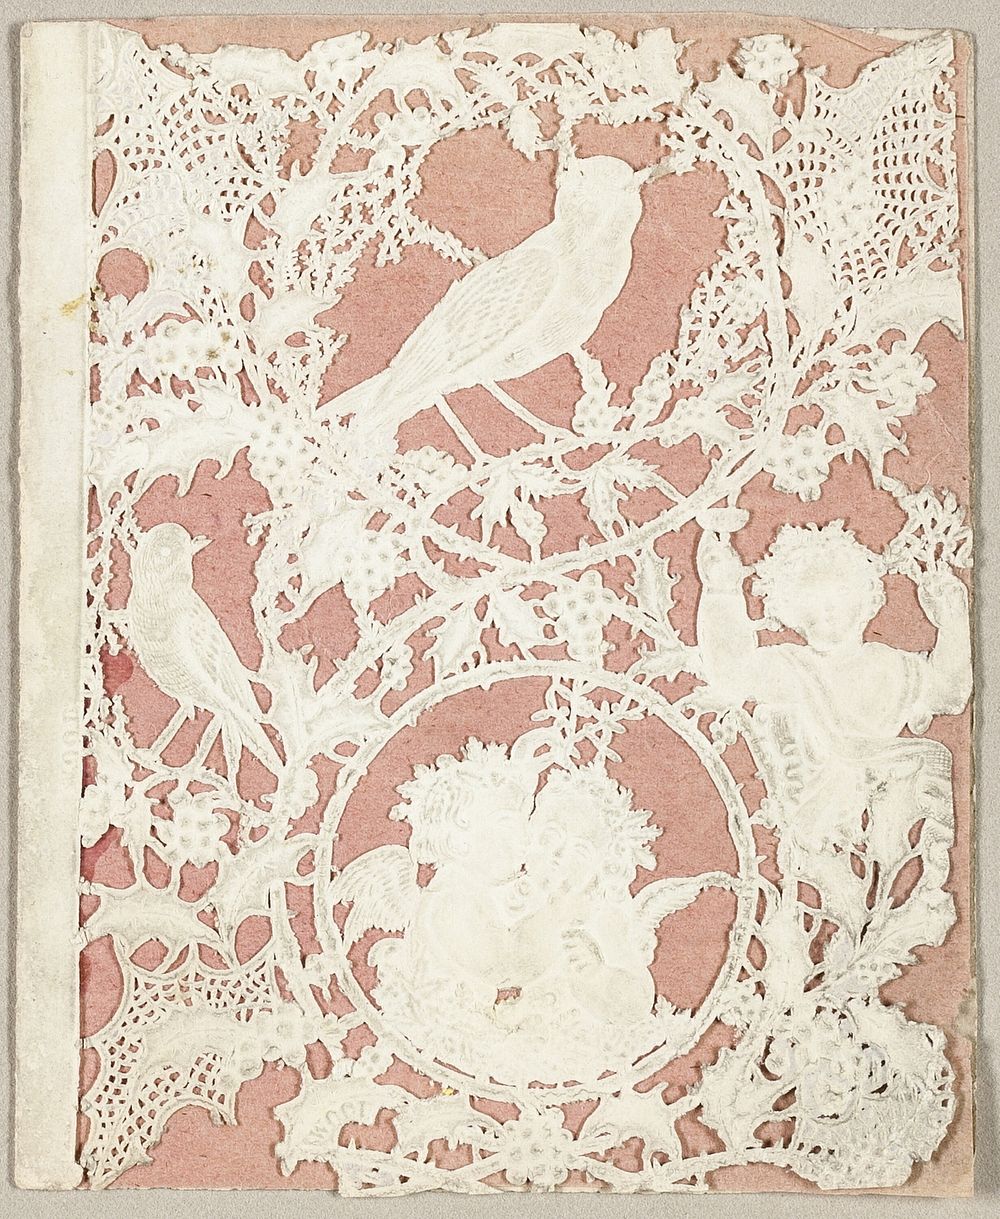 Untitled Valentine (Putti and Birds) by Thomas Wood